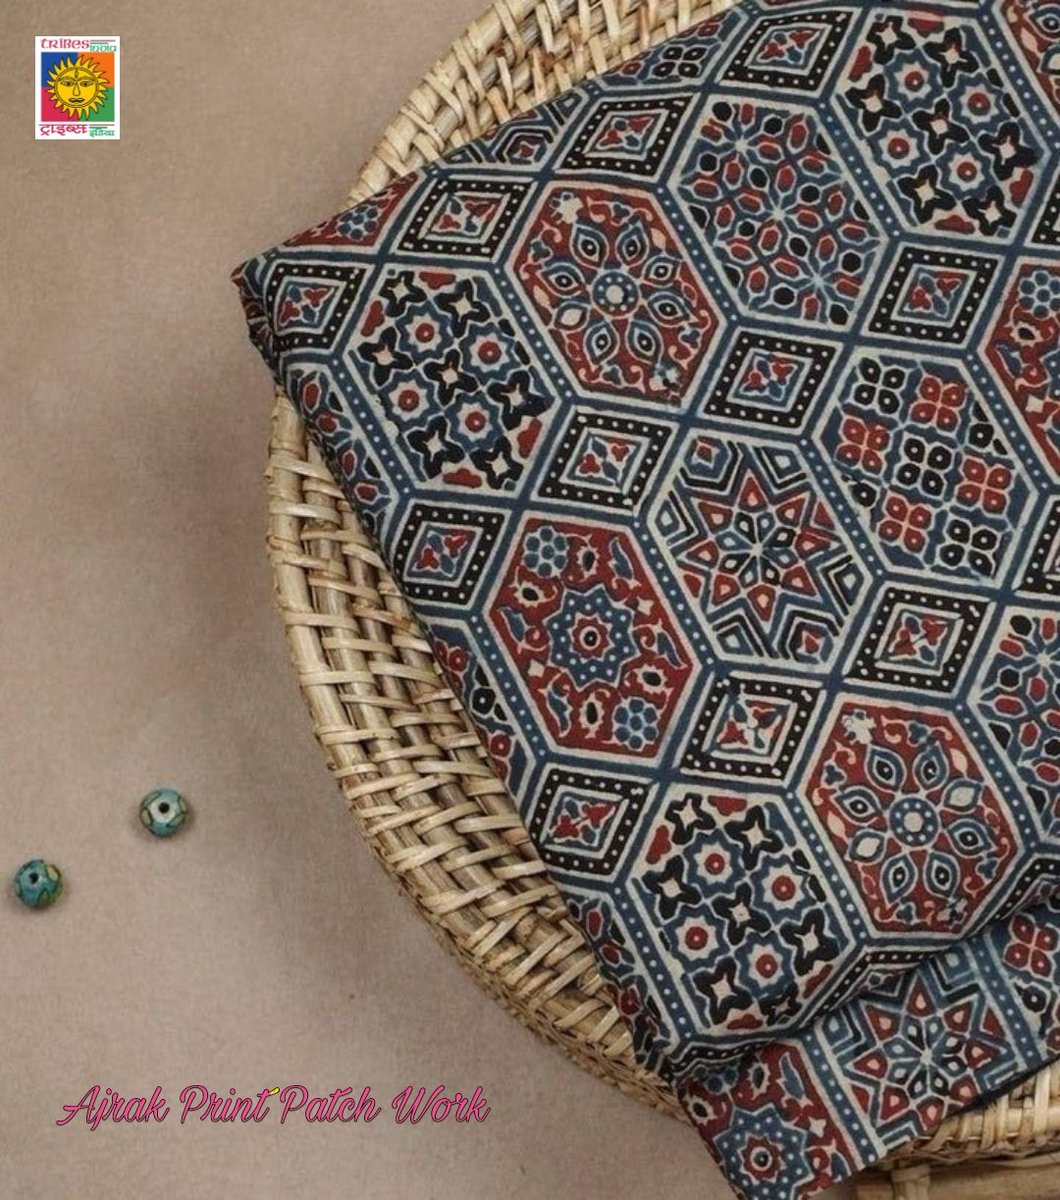 Tribes India
Ajrak Print Patch Work 

One stop gifting destination for ur loved ones with premium packaging and quality new range products !
Do visit our store or shop online
tribesindia.com

Up to 40% Off On All Handicrafted and Handlooms.

#Vocal4Local
#BuyTribal